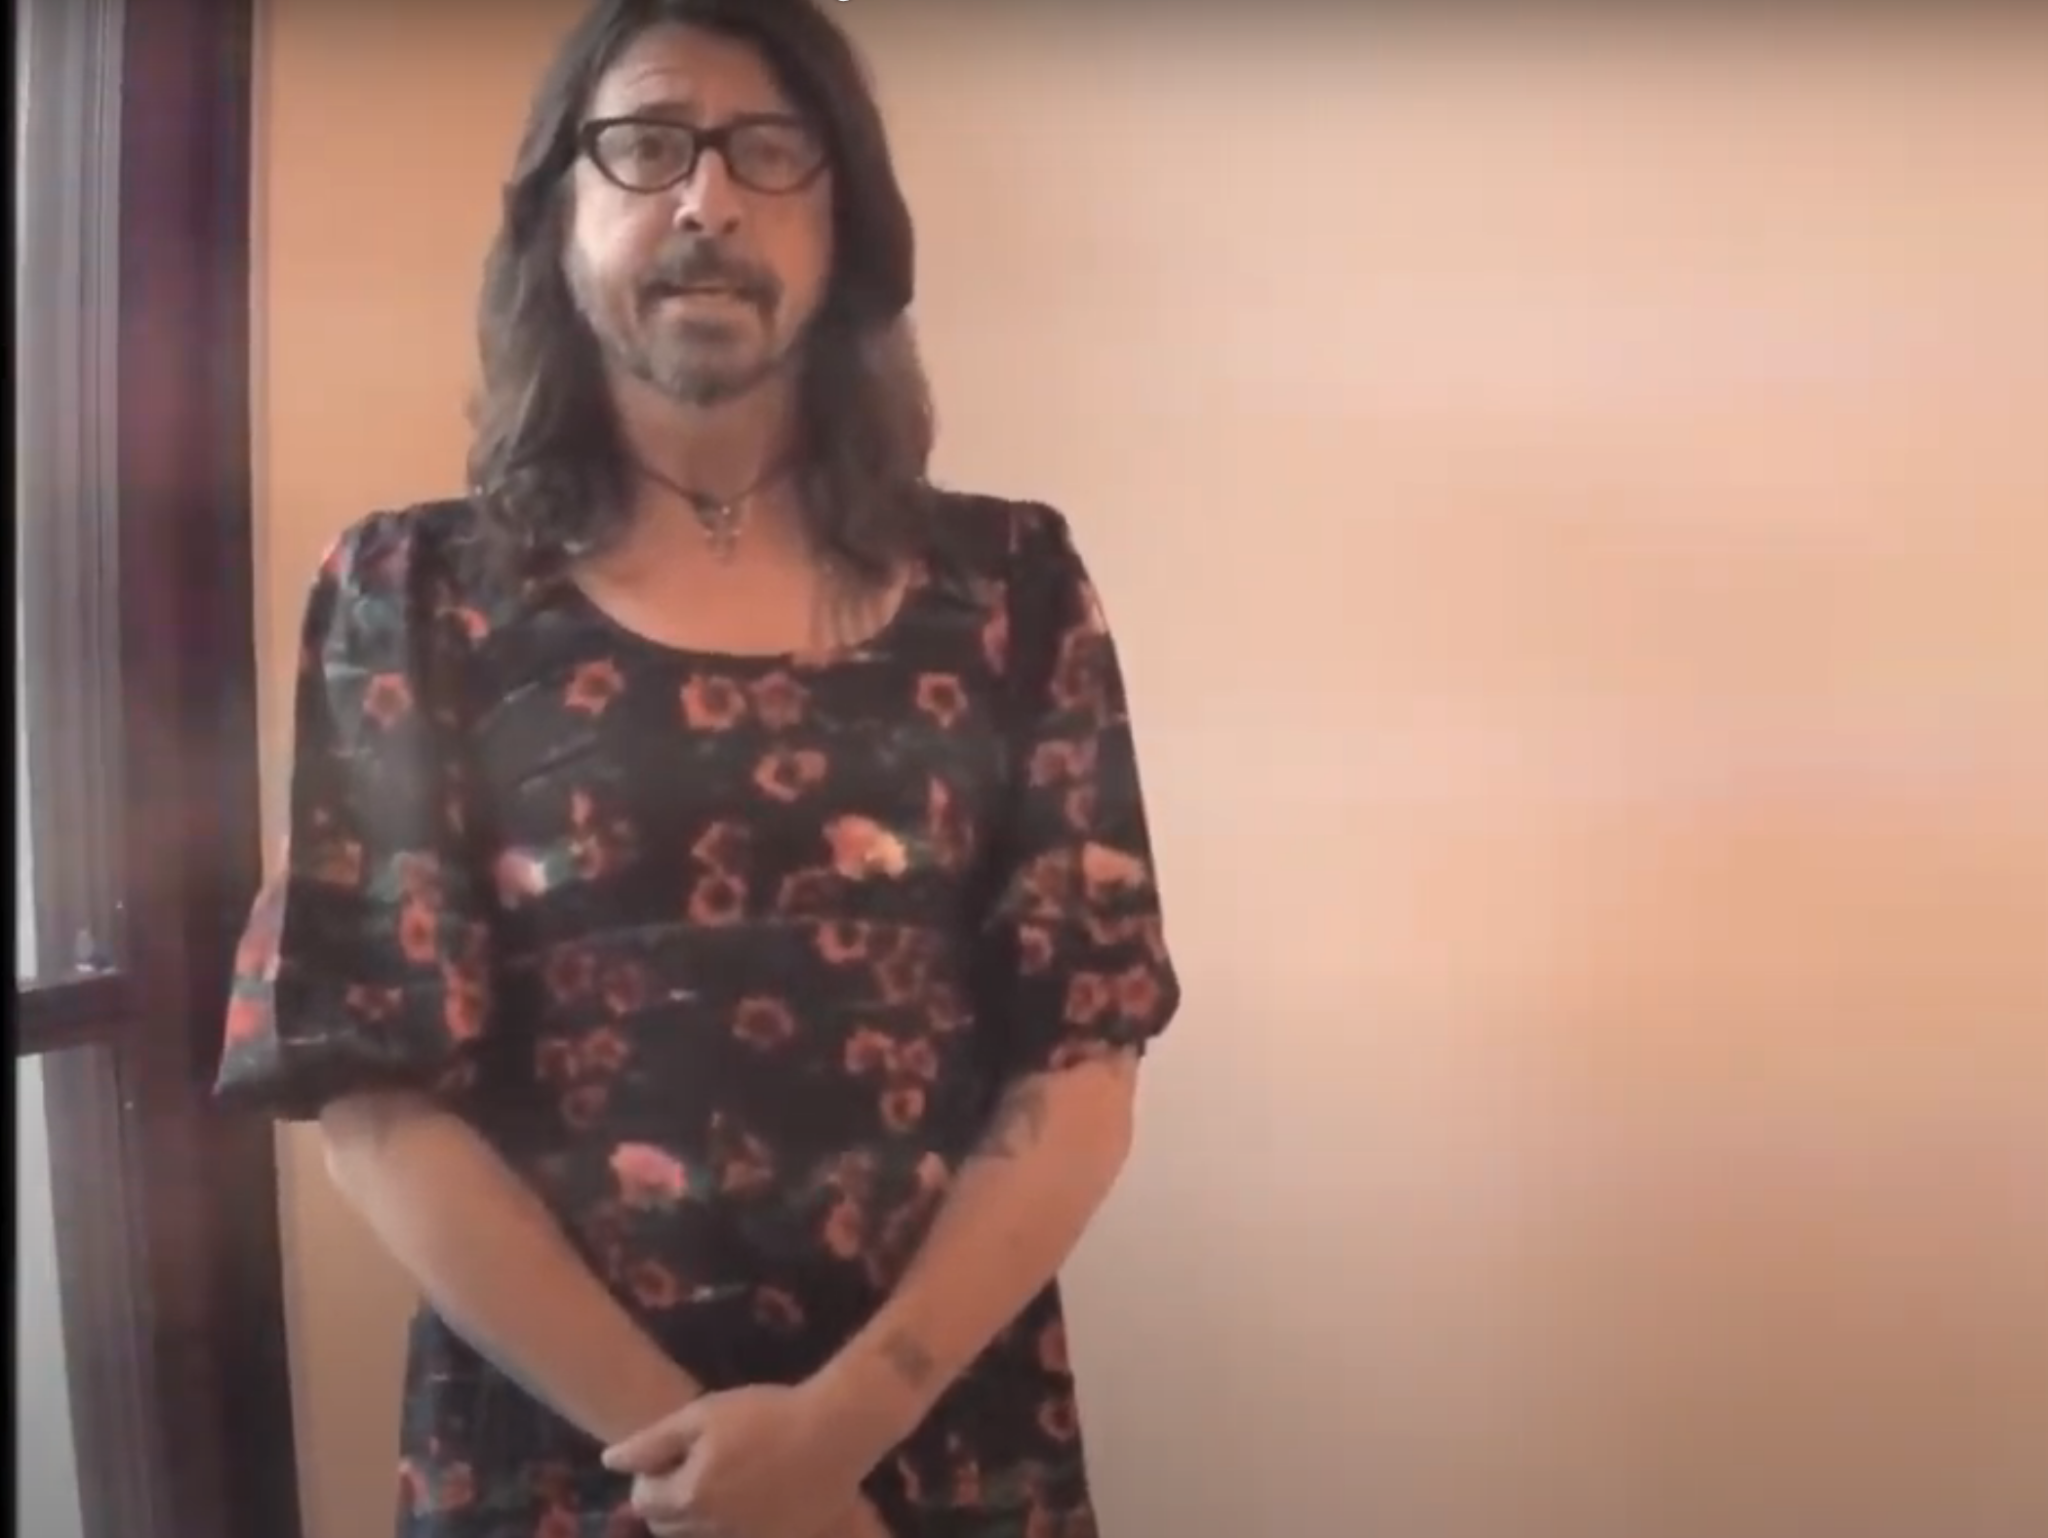 Dave Grohl and Greg Kurstin Reignite 'Hanukkah Sessions' With Lisa Loeb Cover